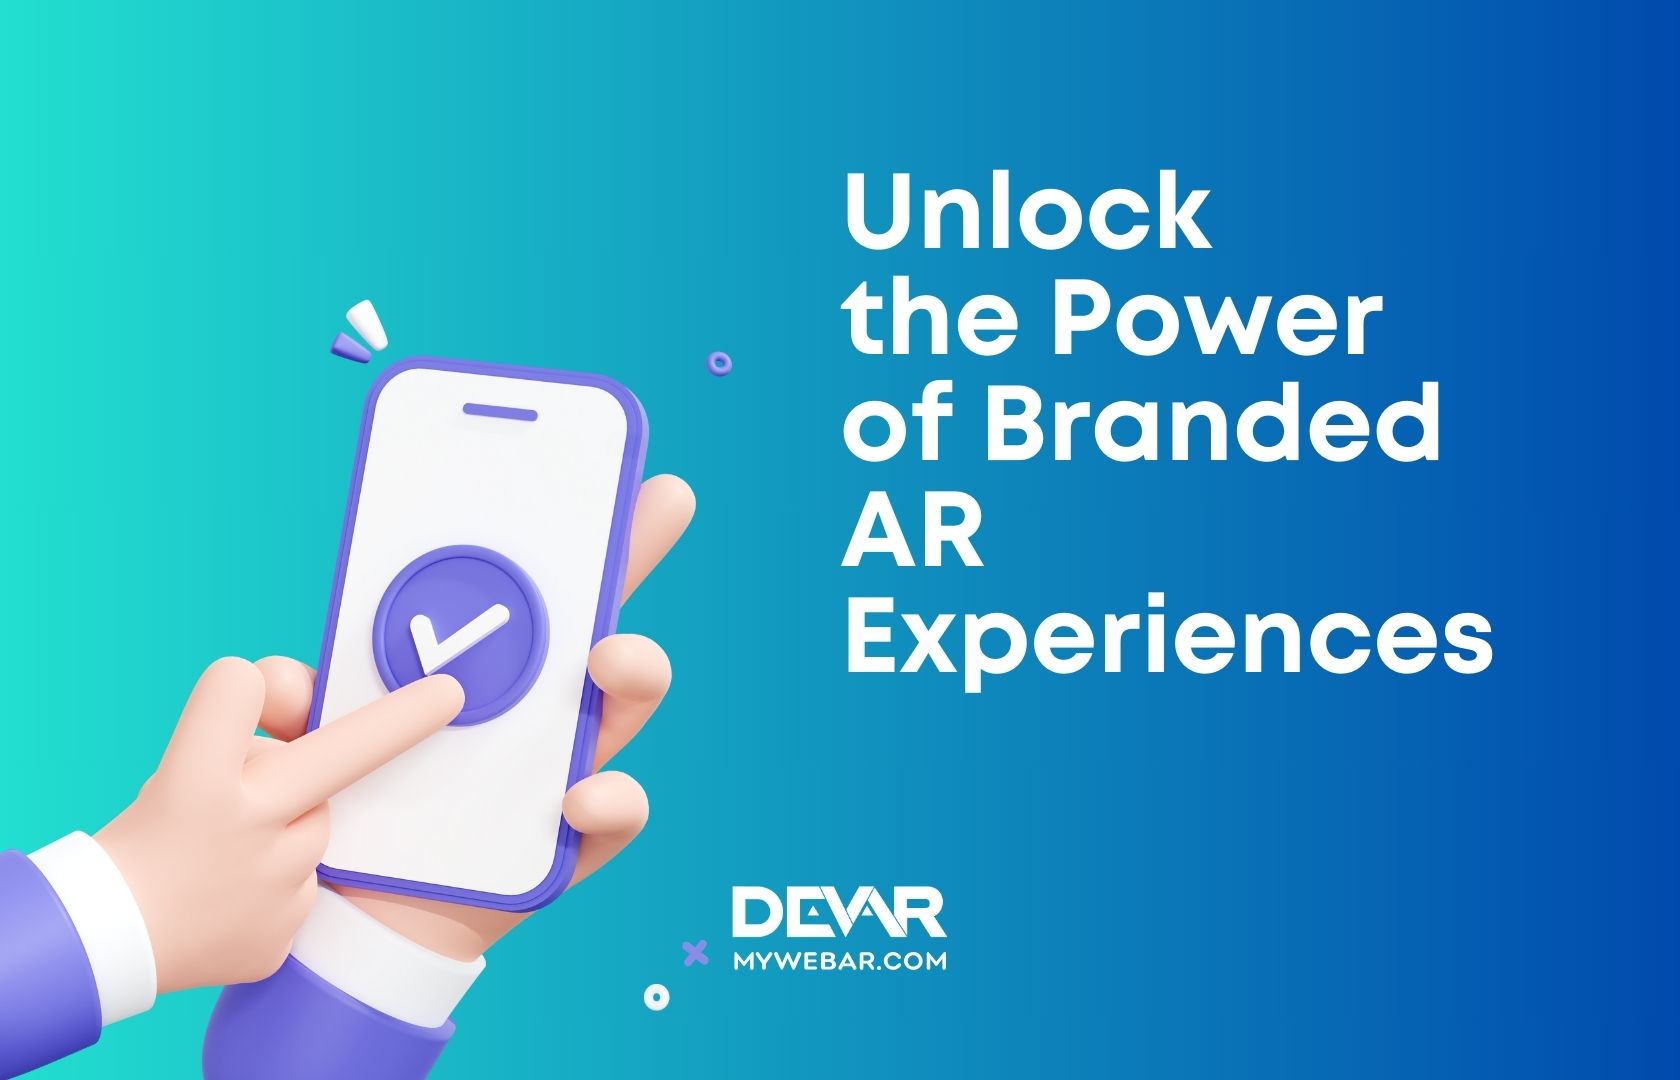 Unlock the Power of Branded Augmented Reality Experiences with MyWebAR